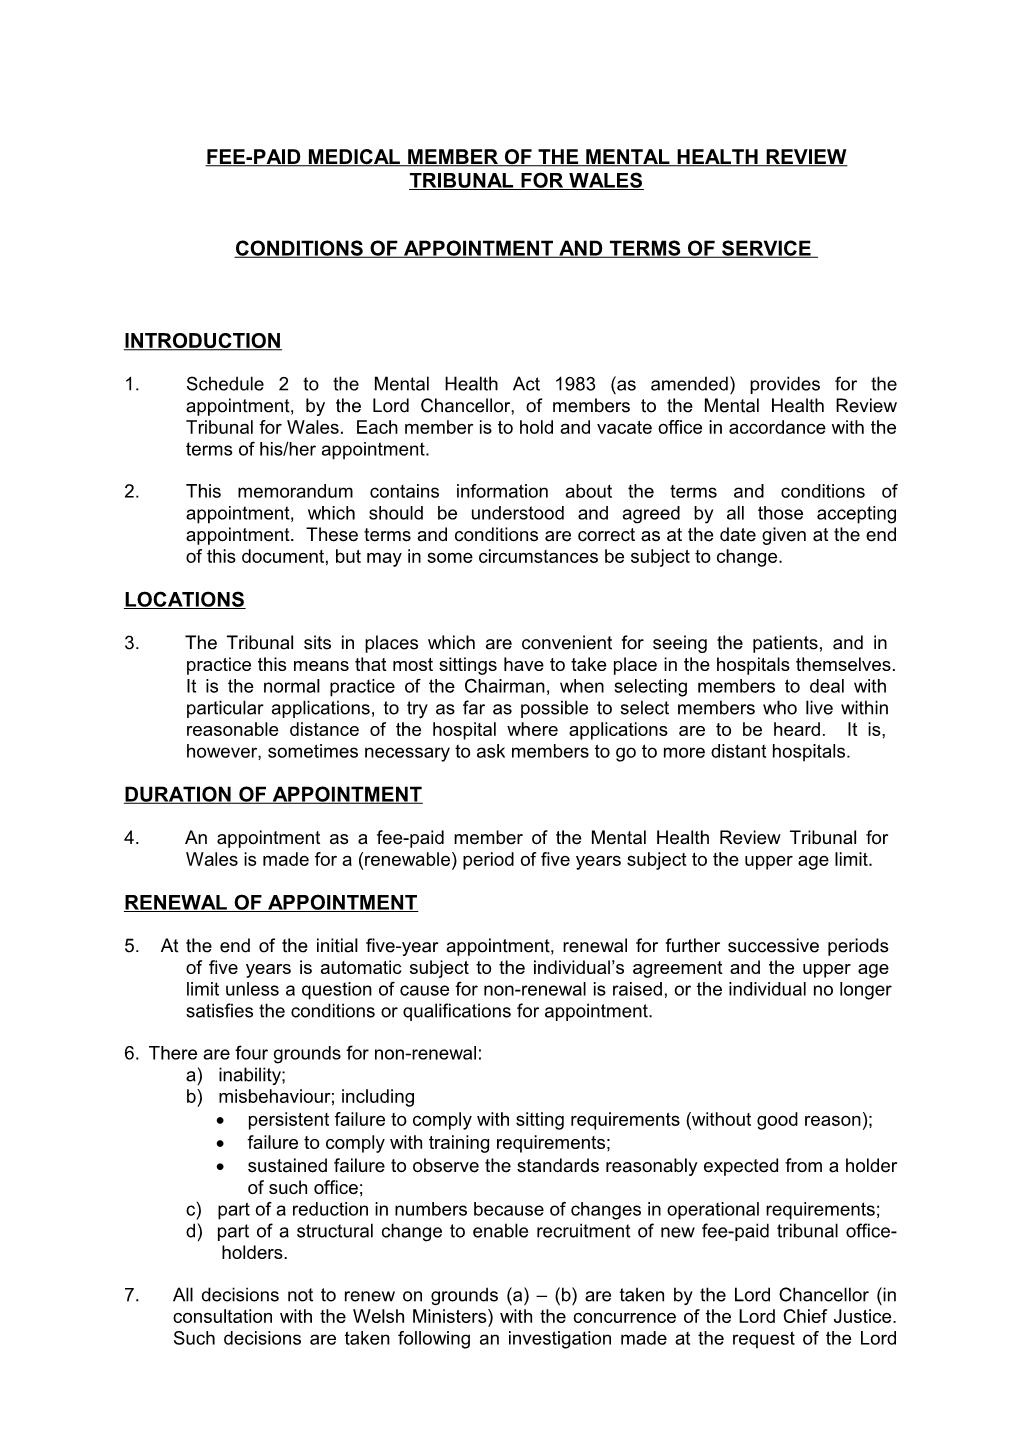 Outline Terms and Conditions of Service